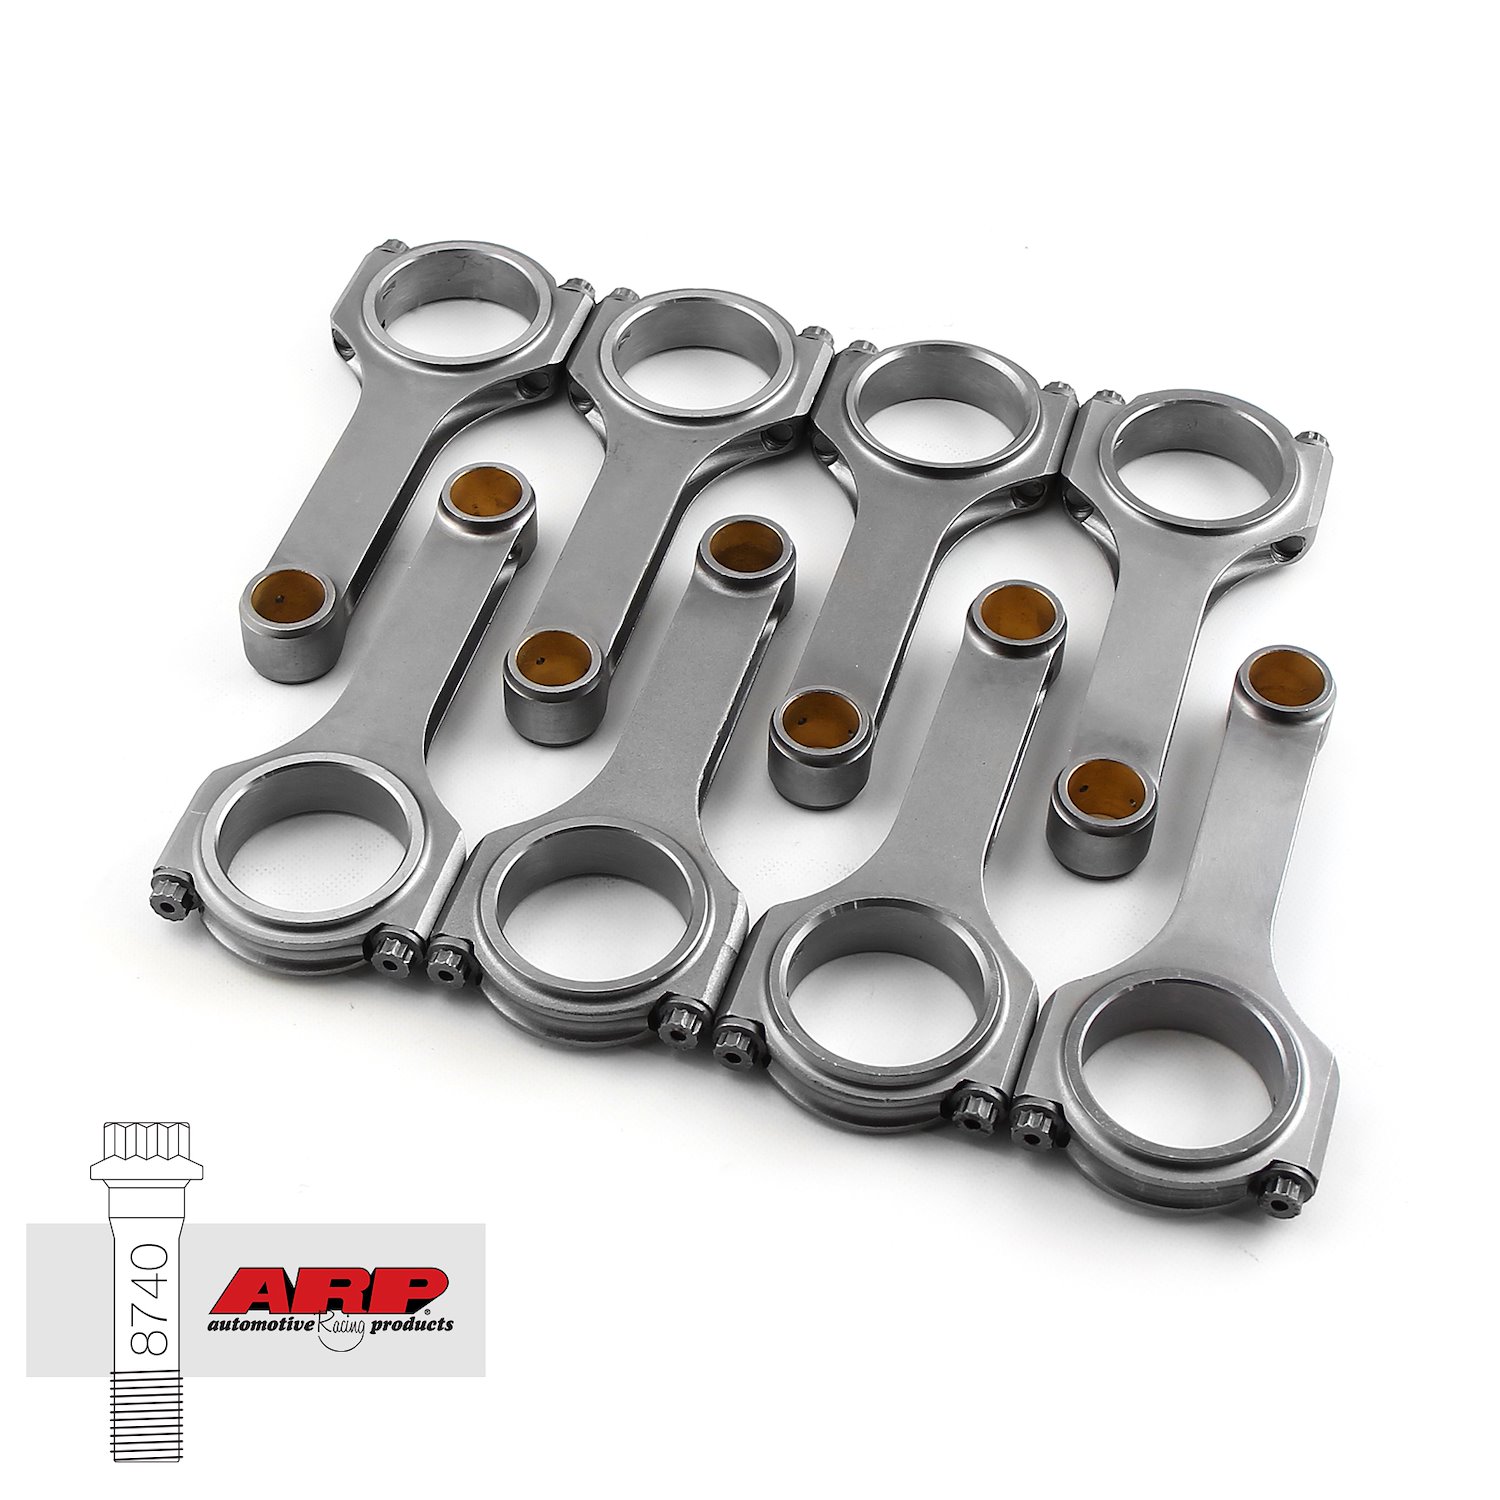 H BEAM 5.400 2.123 .927 4340 CONNECTING RODS FORD 302 WINDSOR W/ ARP 8740